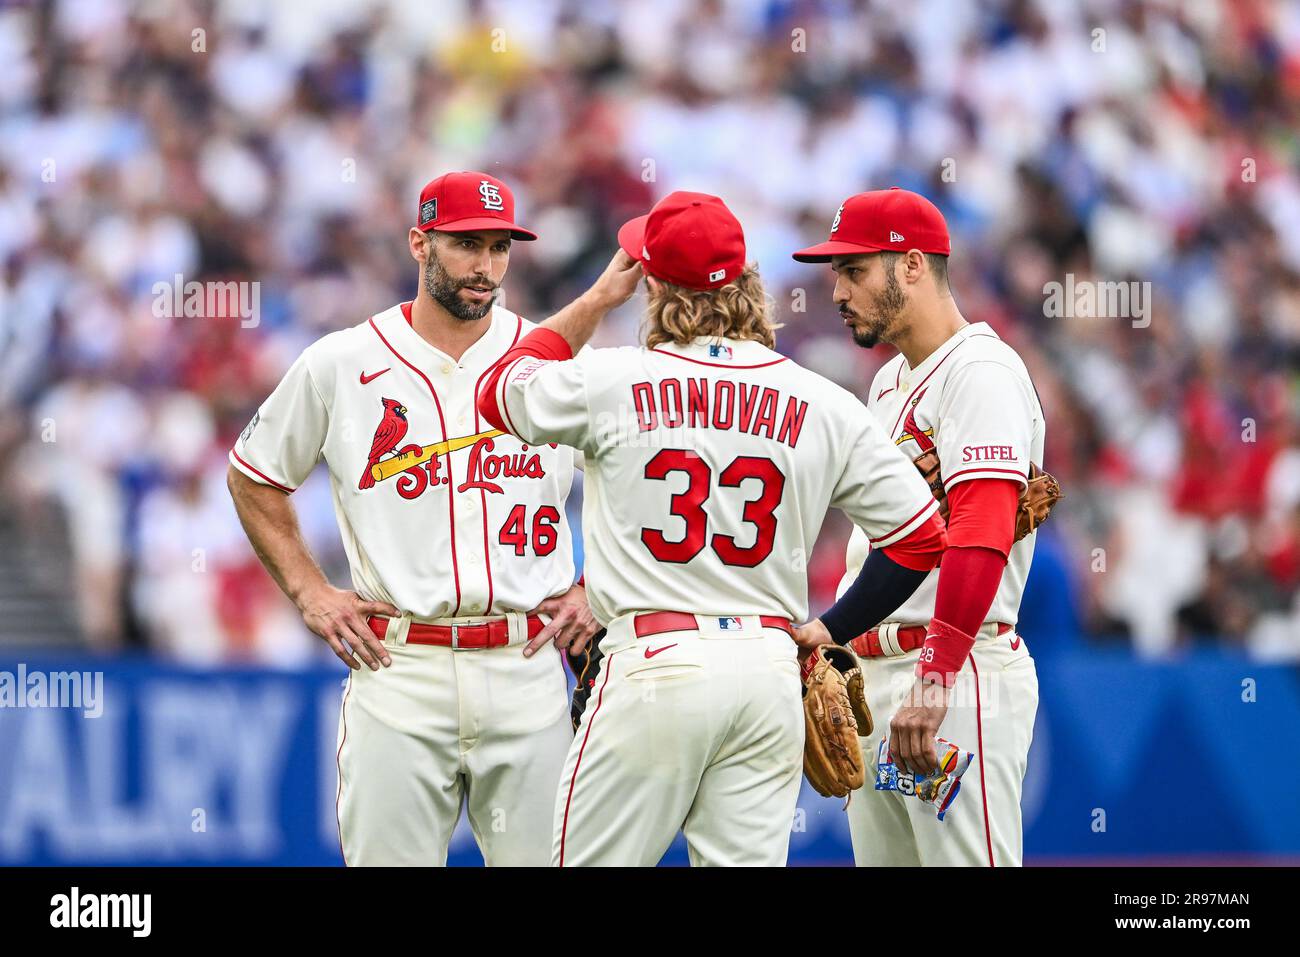 Brendan Donovan #33, Nolan Arenado #28 and Paul Goldschmidt #46 of the St. Louis Cardinals chat during the 2023 MLB London Series match St. Louis Cardinals vs Chicago Cubs at London Stadium, London, United Kingdom, 24th June 2023 (Photo by Craig Thomas/News Images) in, on 6/24/2023. (Photo by Craig Thomas/News Images/Sipa USA) Credit: Sipa USA/Alamy Live News Stock Photo